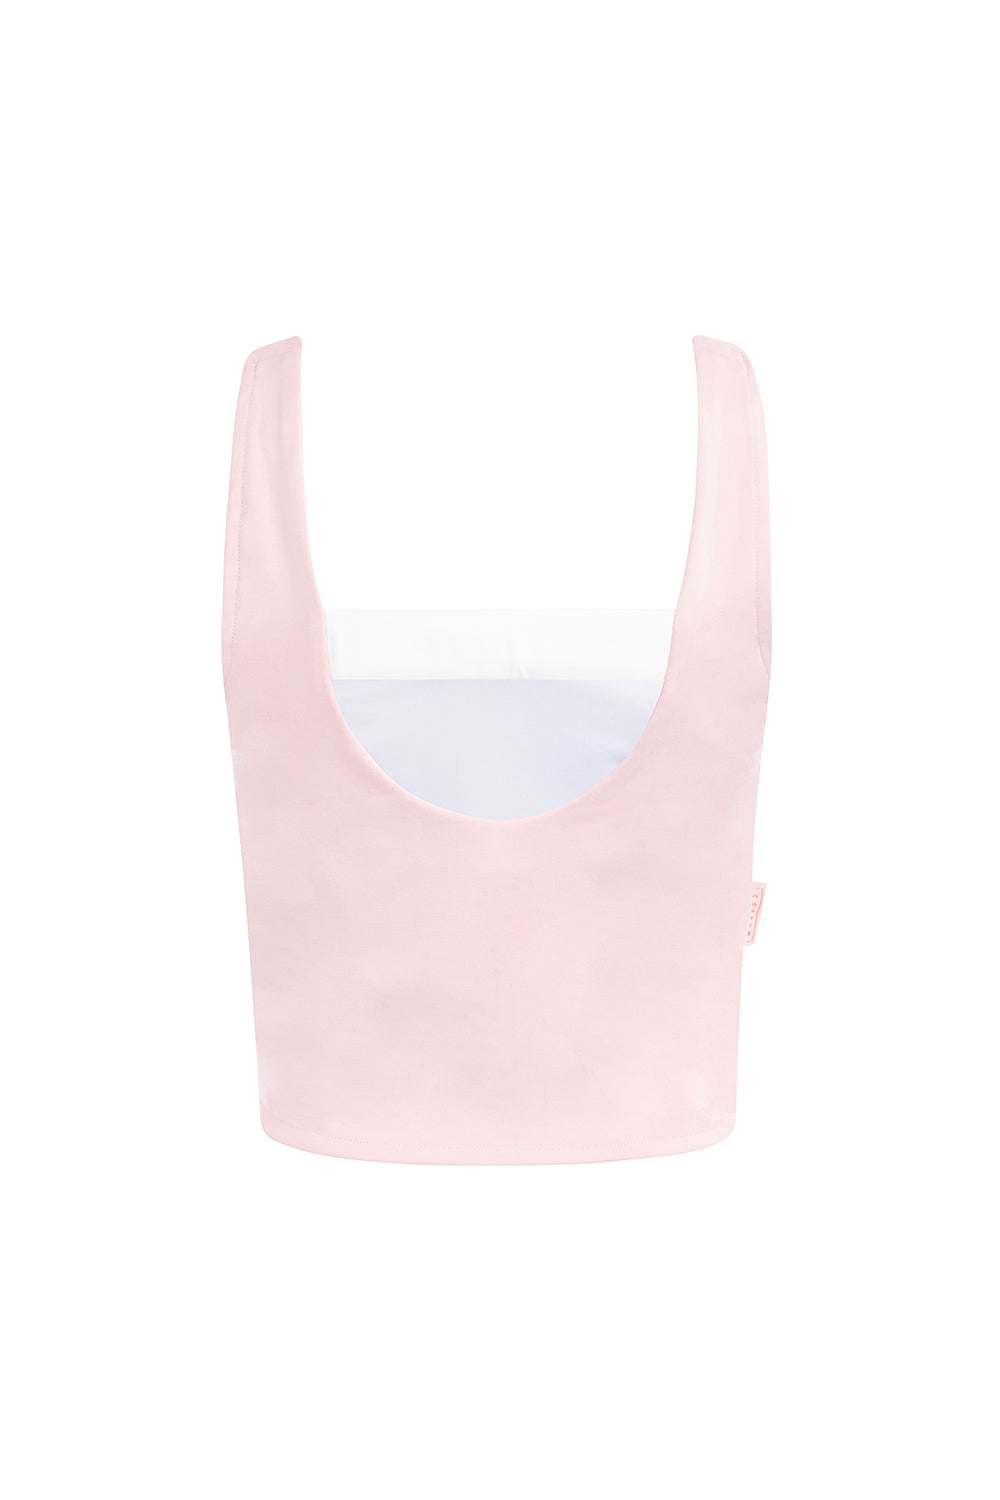 SOFT TOUCH PINK TOP